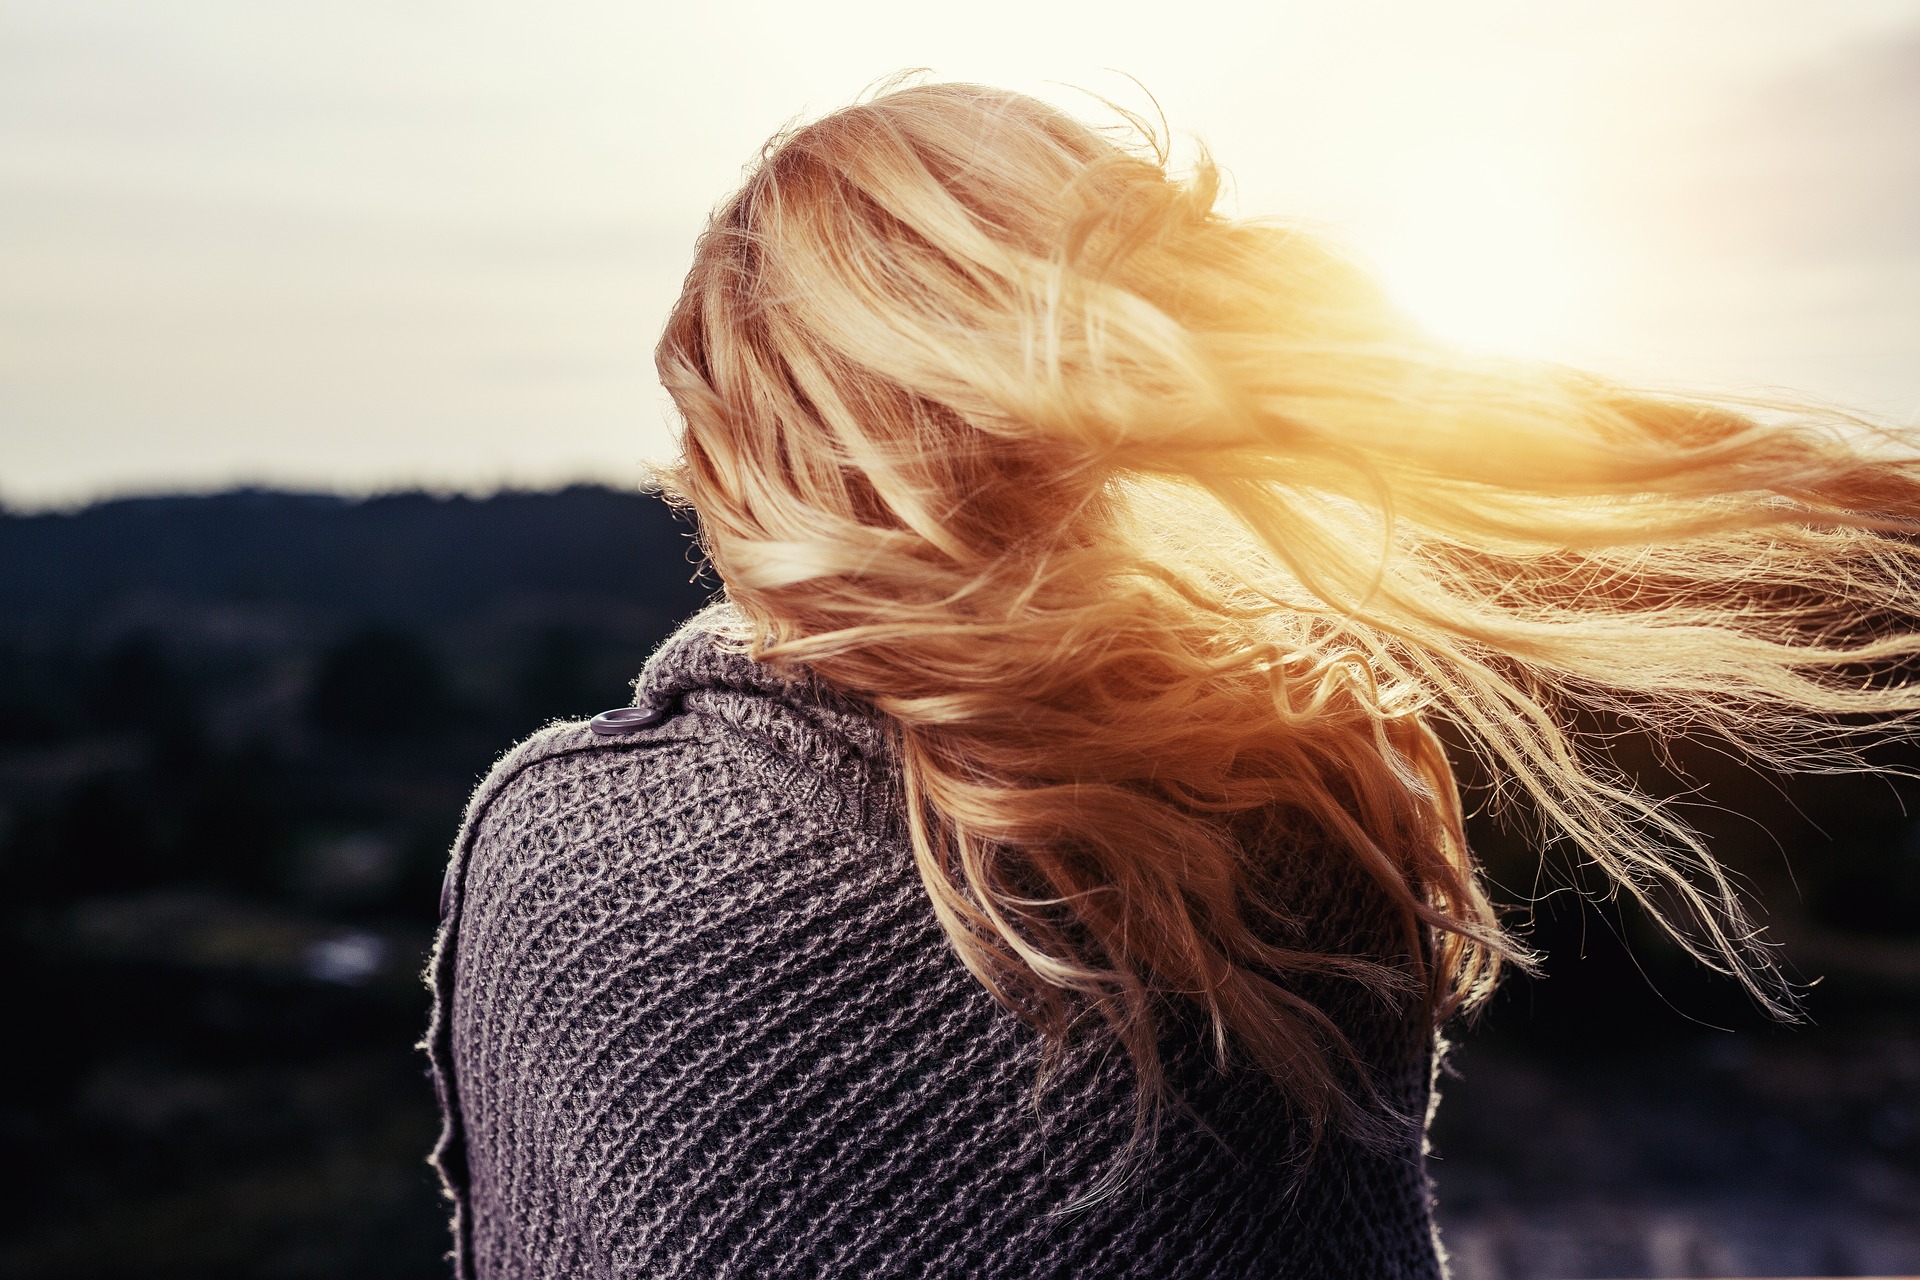 4 TIPS ON HOW TO PROTECT YOUR HAIR FROM THE ENVIRONMENT